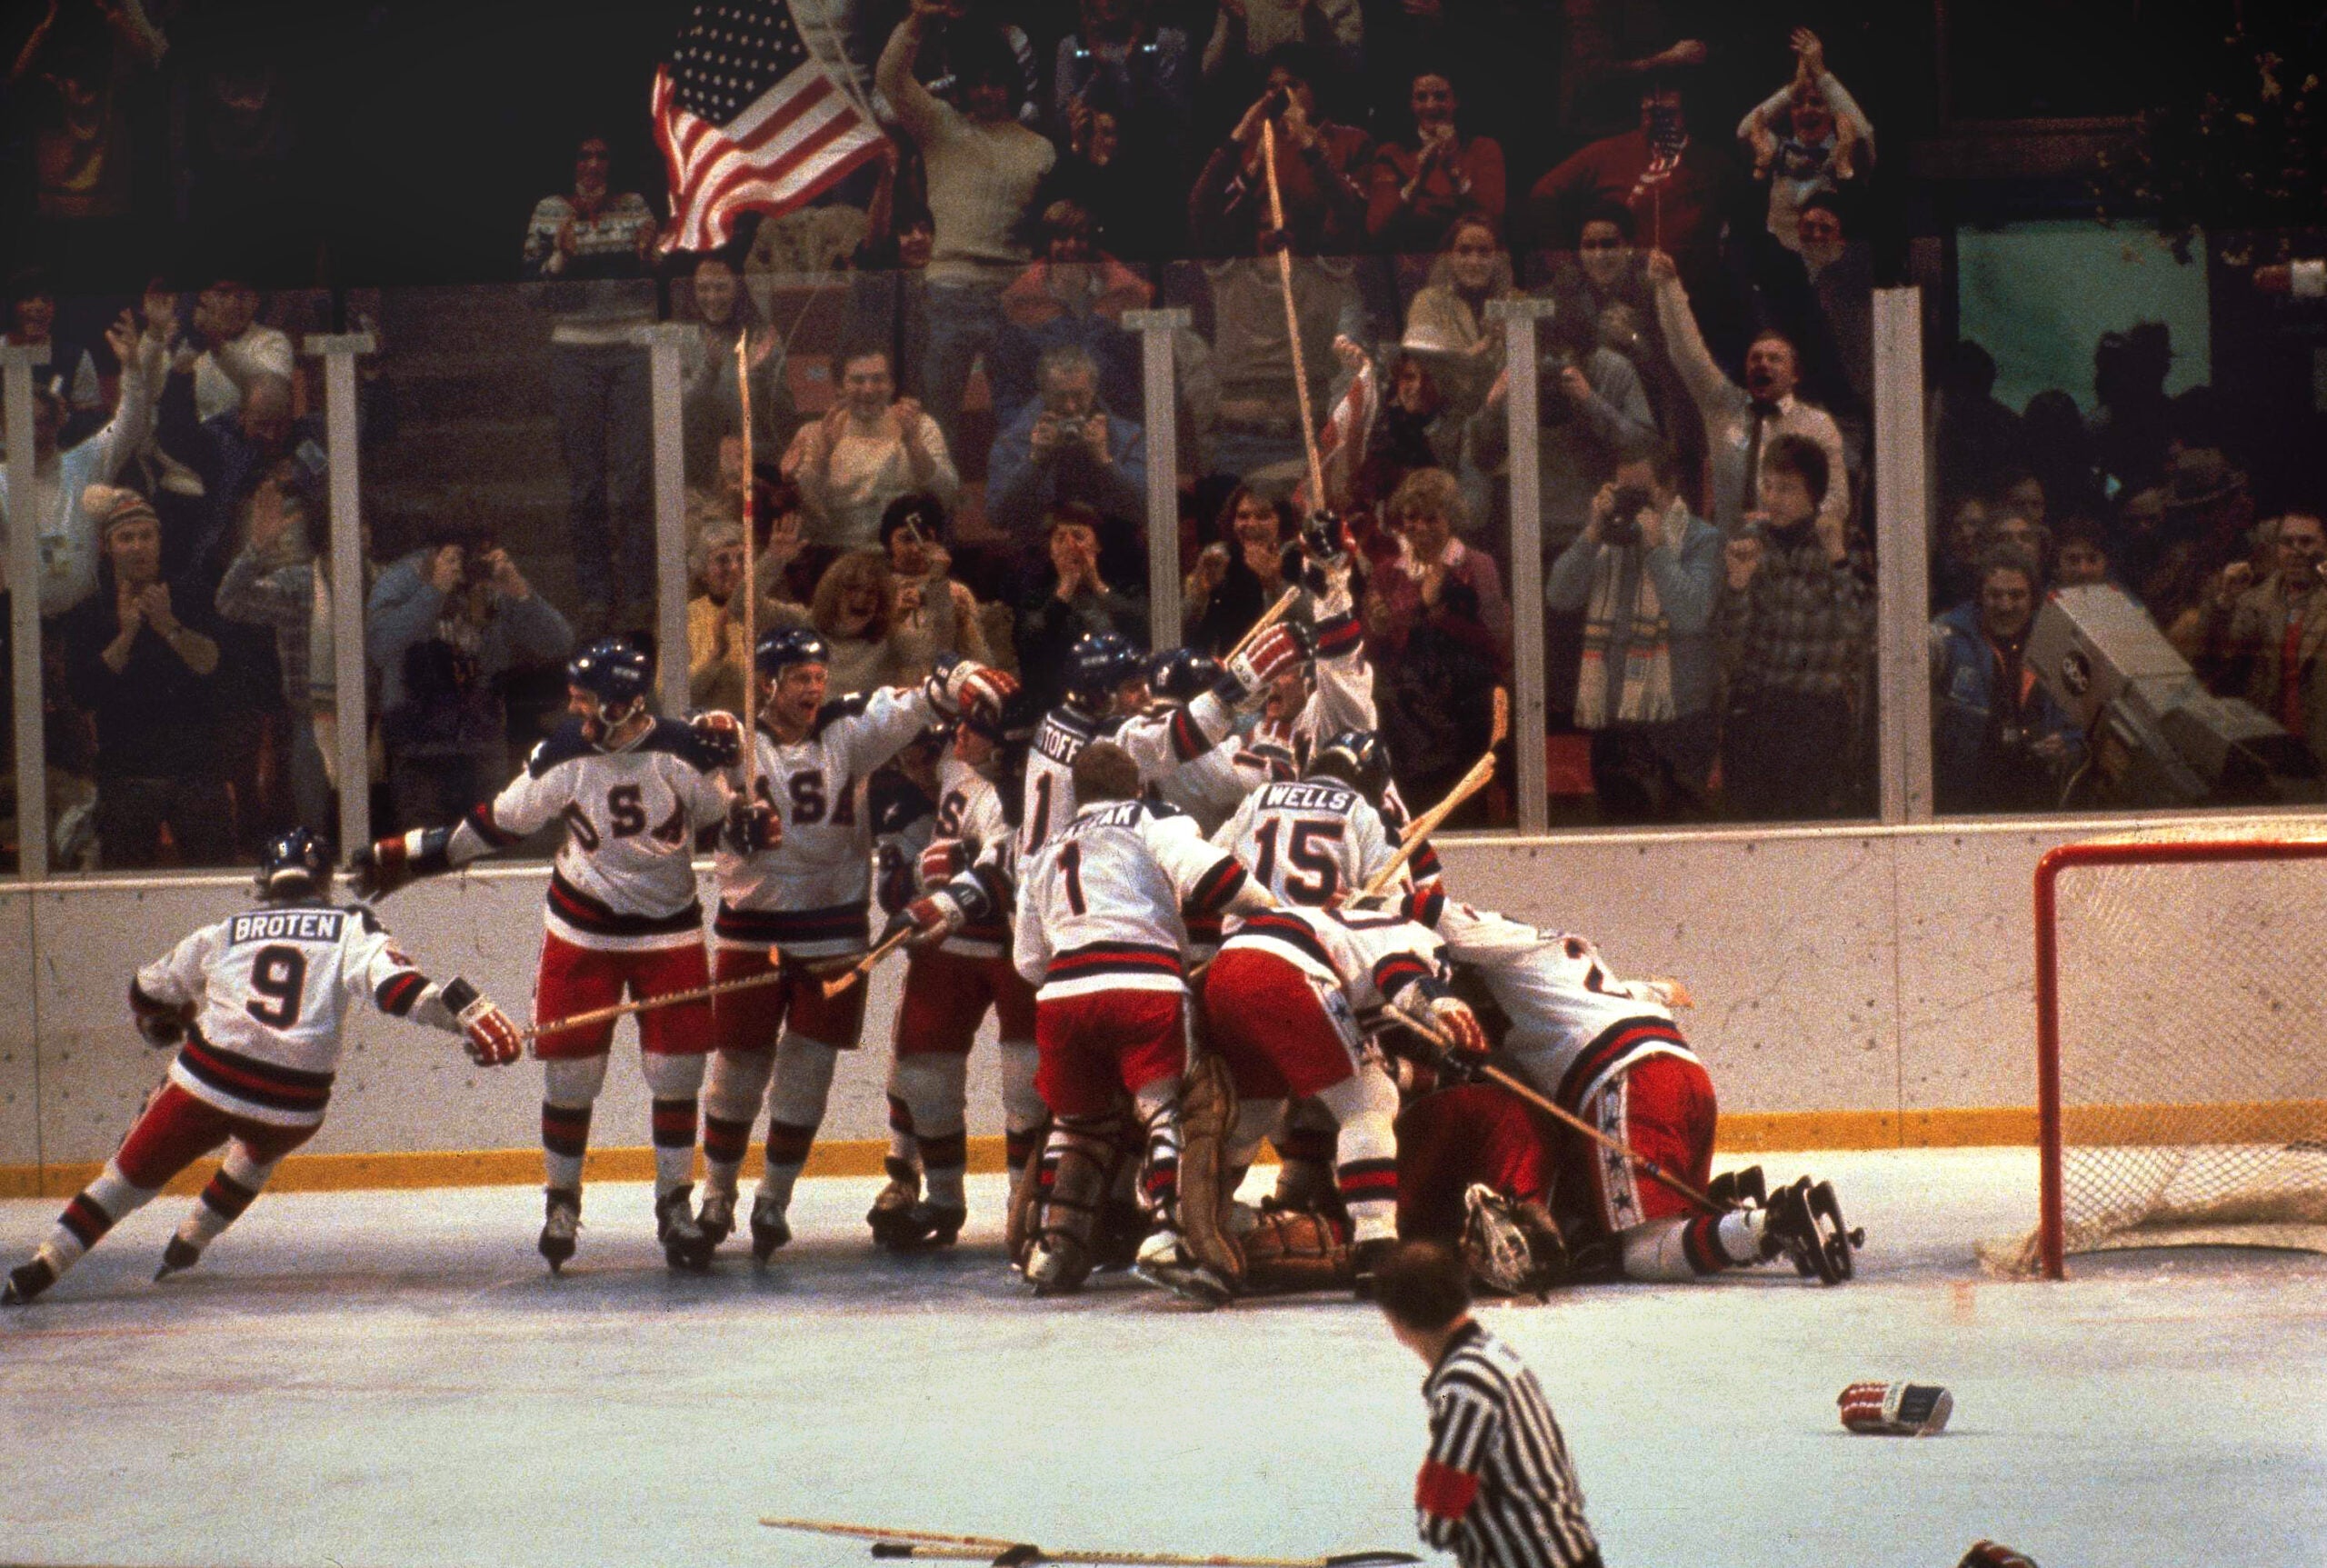 Watch 35 Years Later, Miracle on Ice Still Gives Us Goosebumps